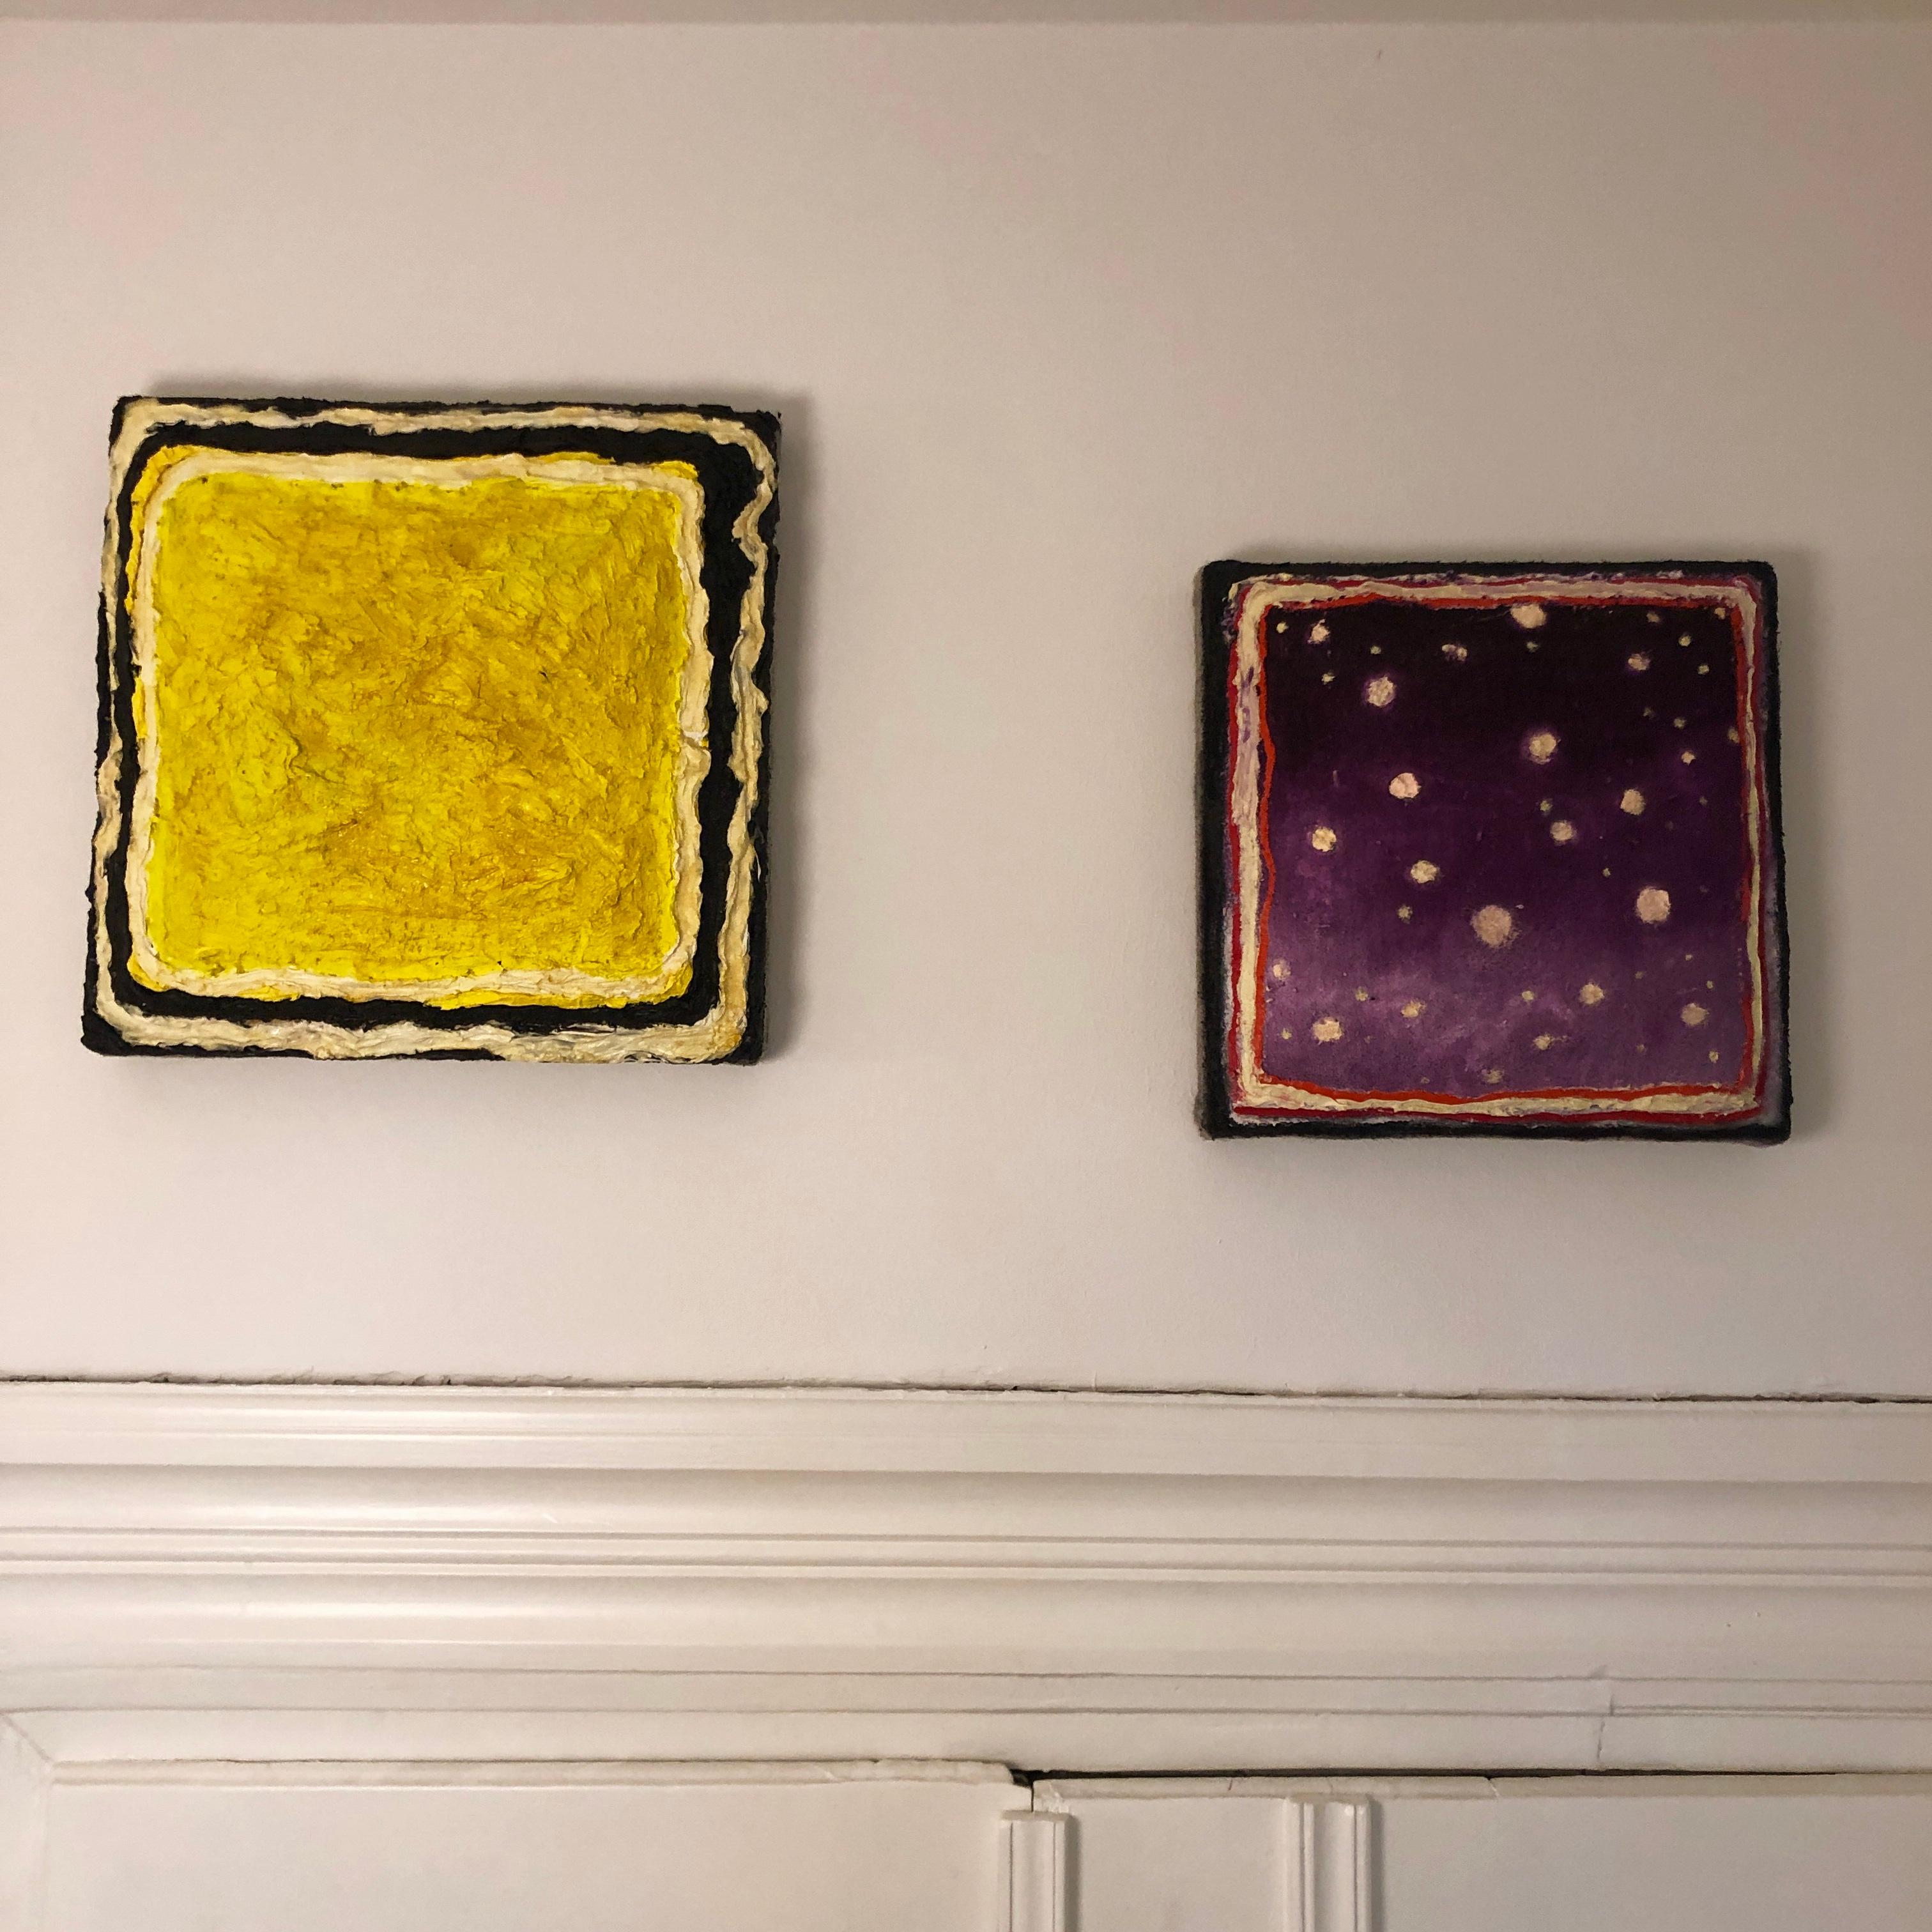 Twisted Stars V - Contemporary, Oil on Felt, 21st C., Yellow, Neon - Painting by Edie Monetti